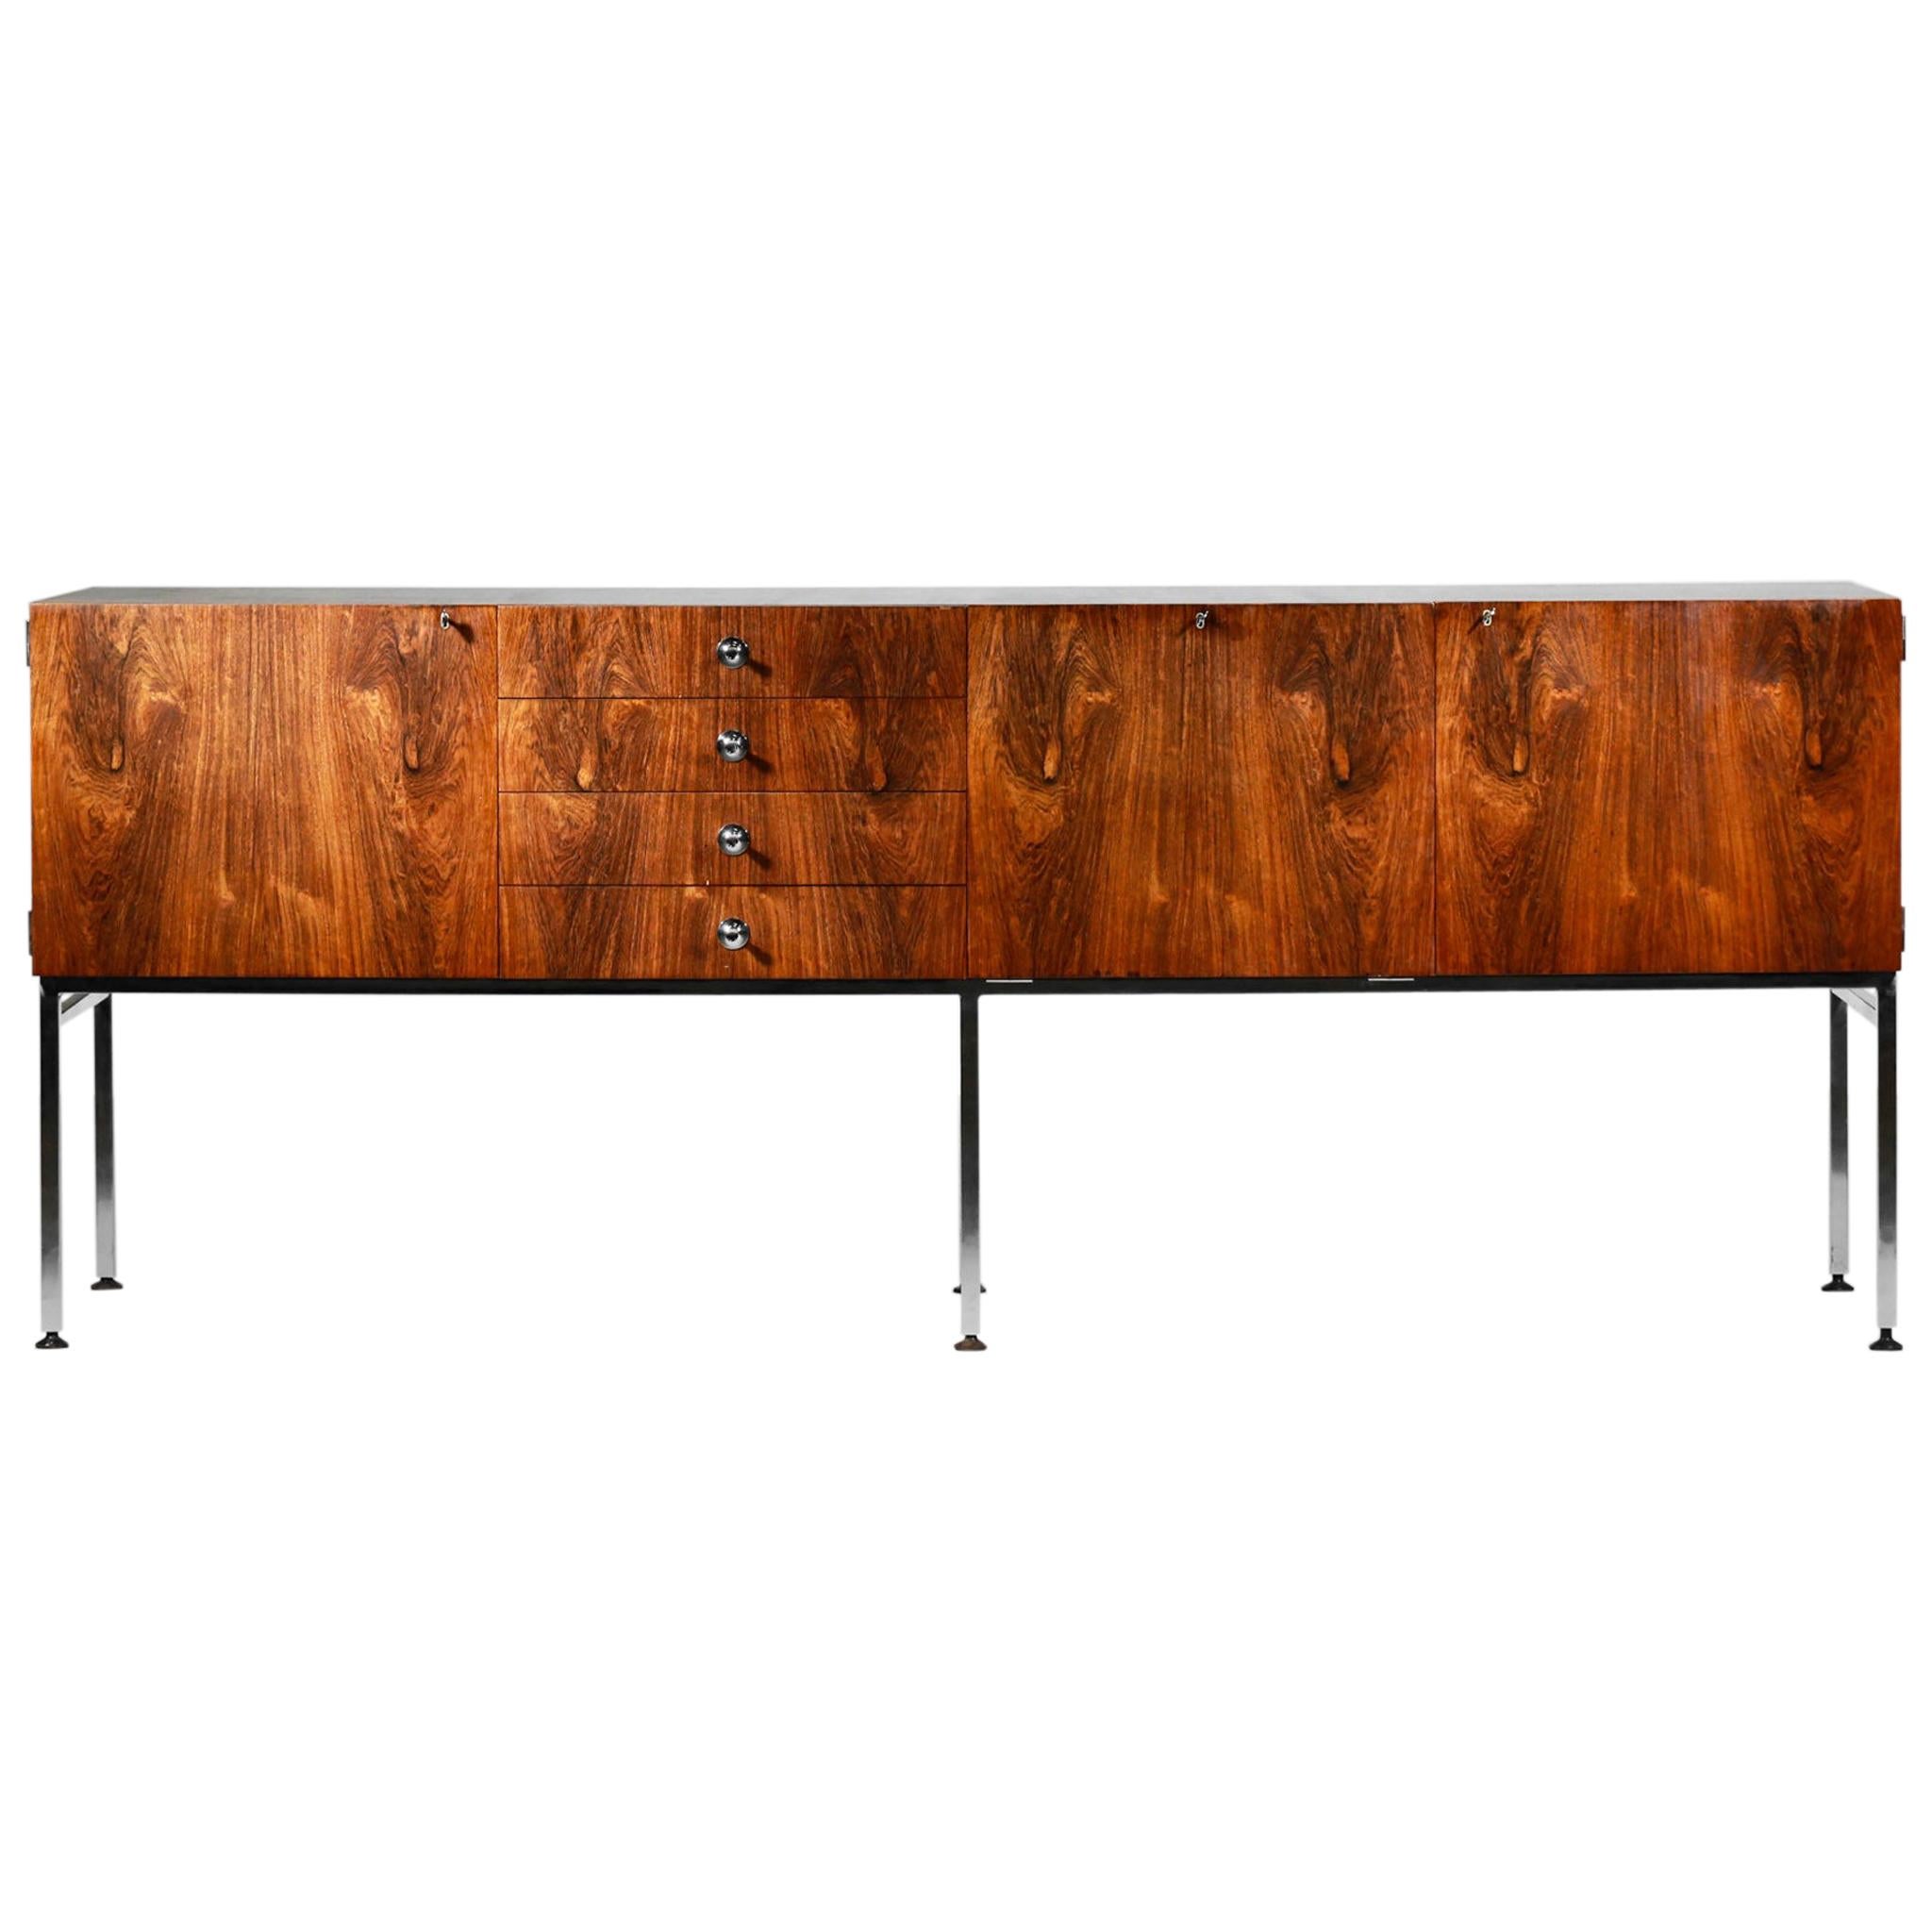 Great Alain Richard Large Sideboard of 1960s for Meuble TV French Design 1960